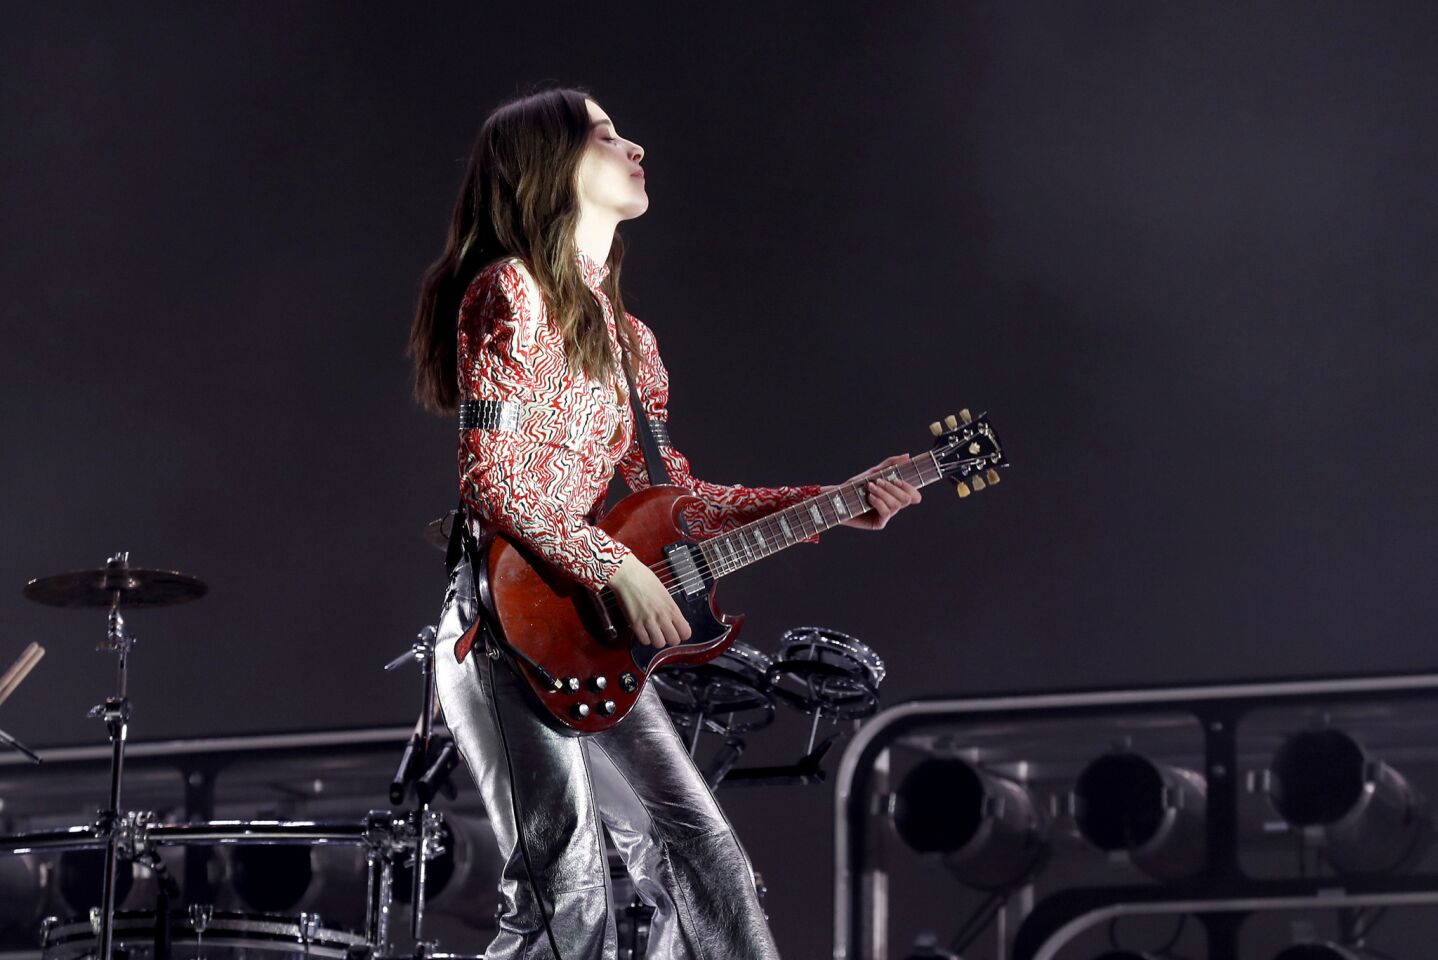 Guitarist Danielle Haim performs with her sisters in the band Haim.